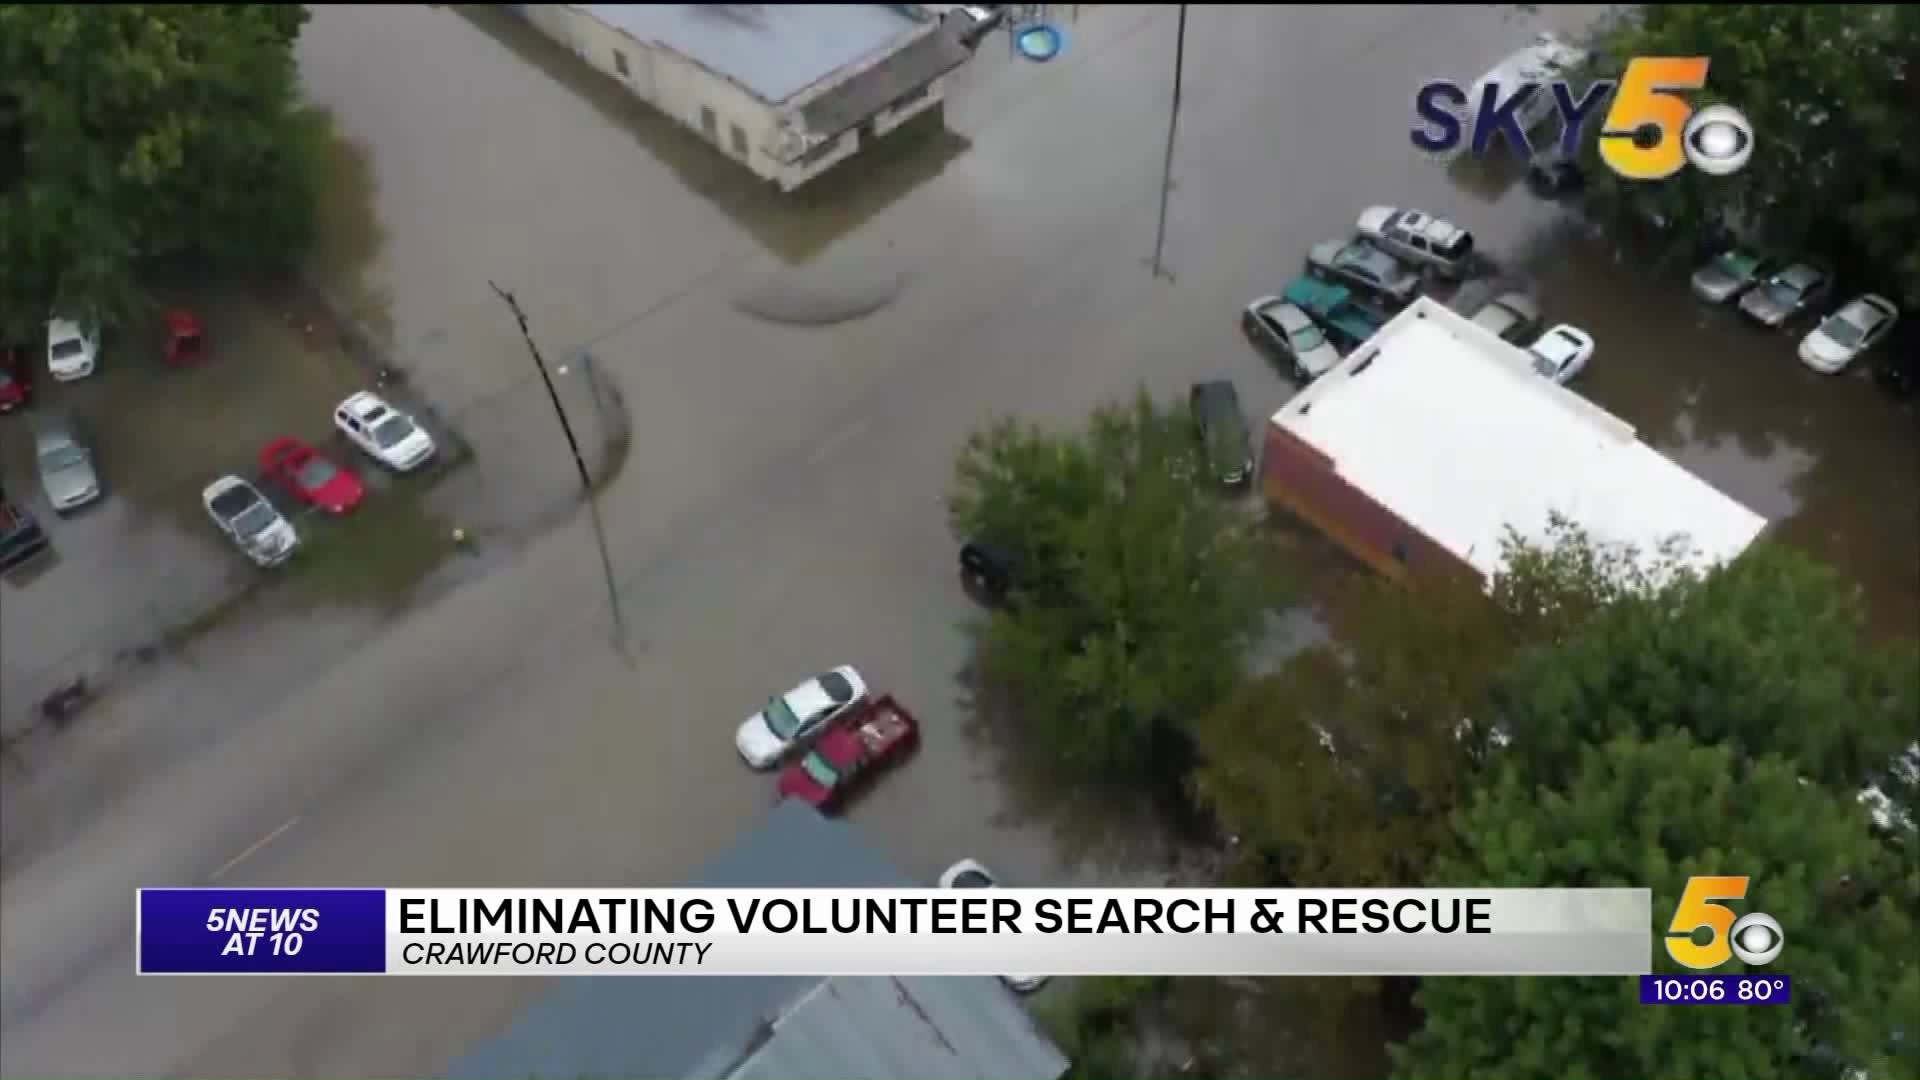 Crawford County Eliminating Volunteer Search & Rescue